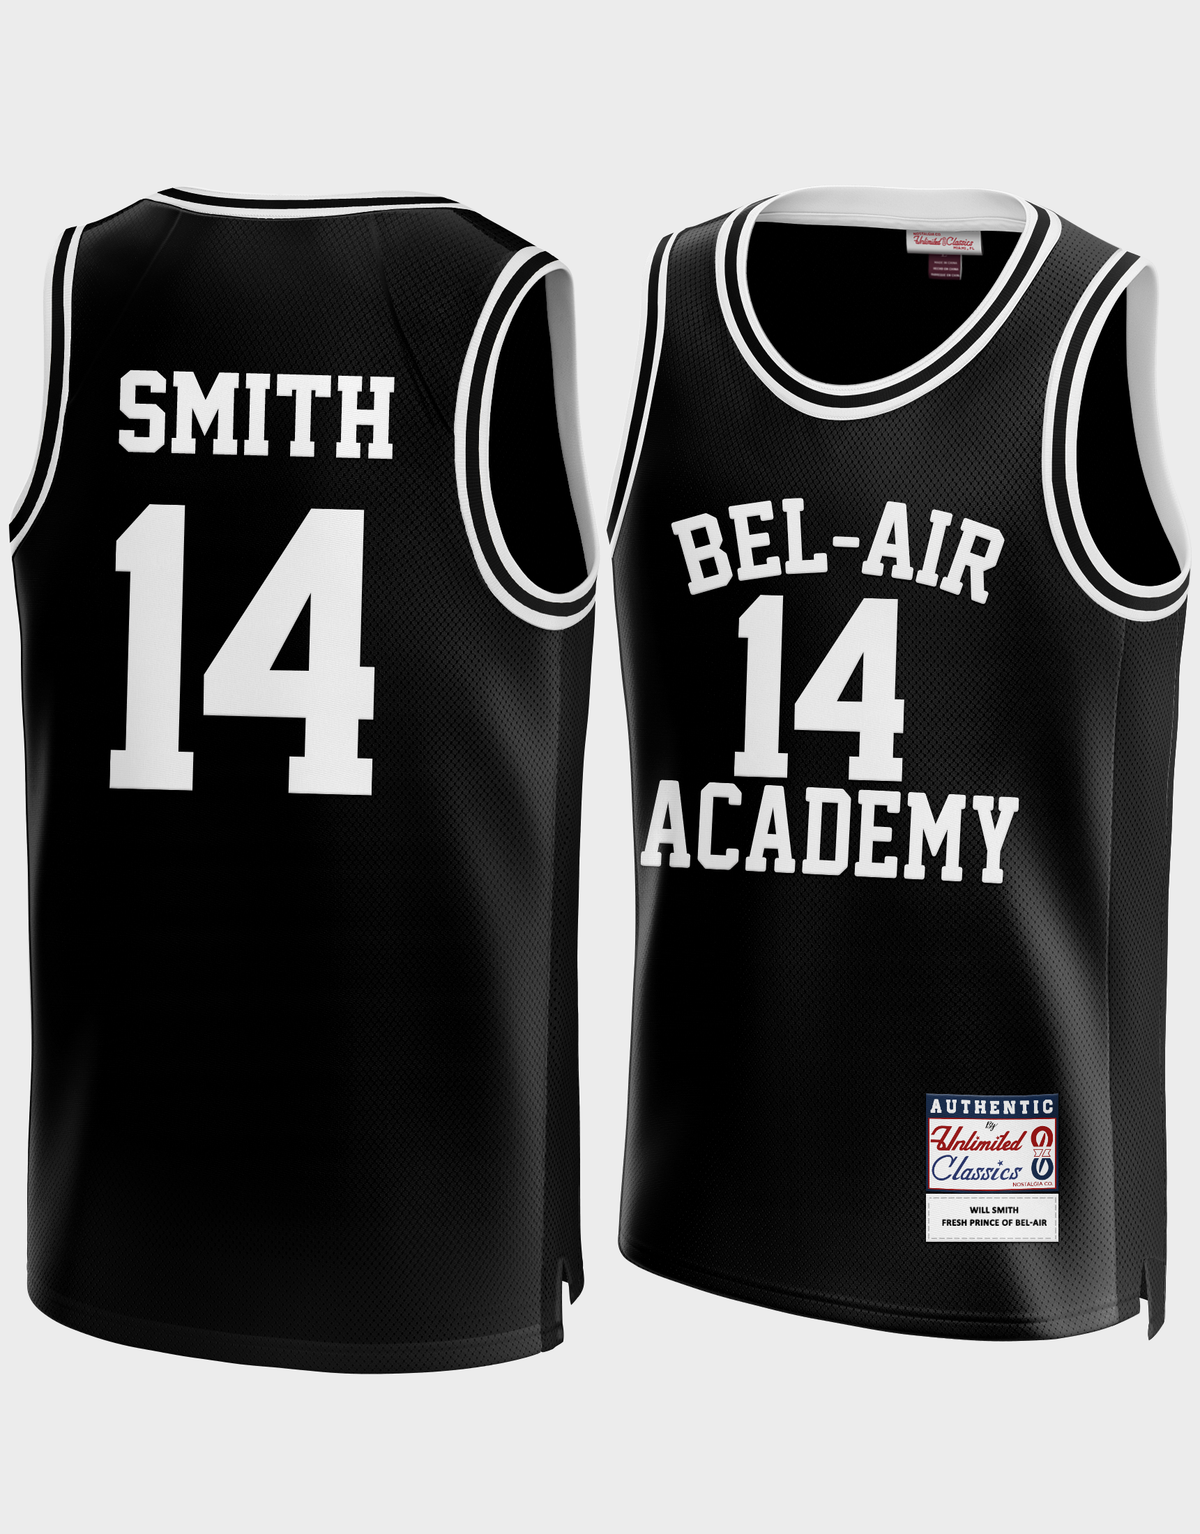 🔥Bel Air Academy Jersey🔥 Brand new/ Size small. Dm me for info